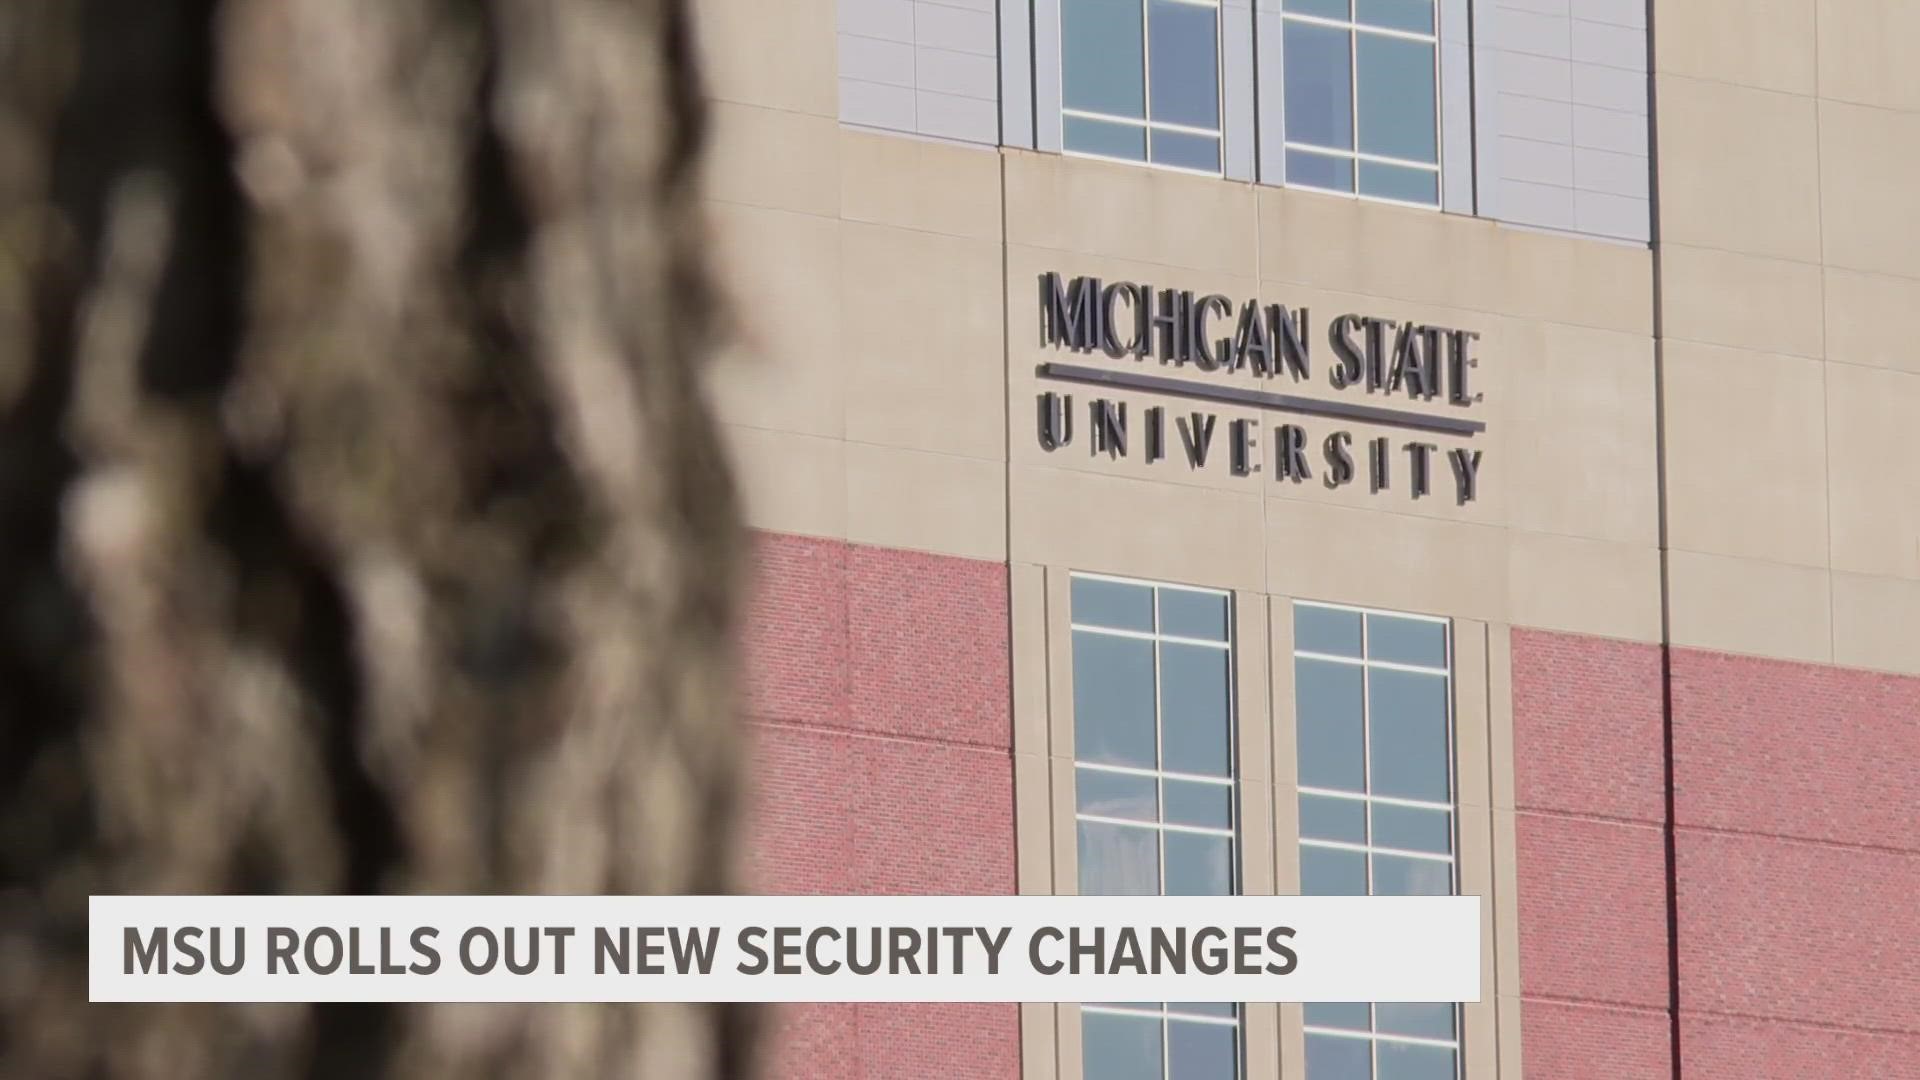 Some of those changes include additional on-campus security cameras and keycard access to most buildings during evening hours.